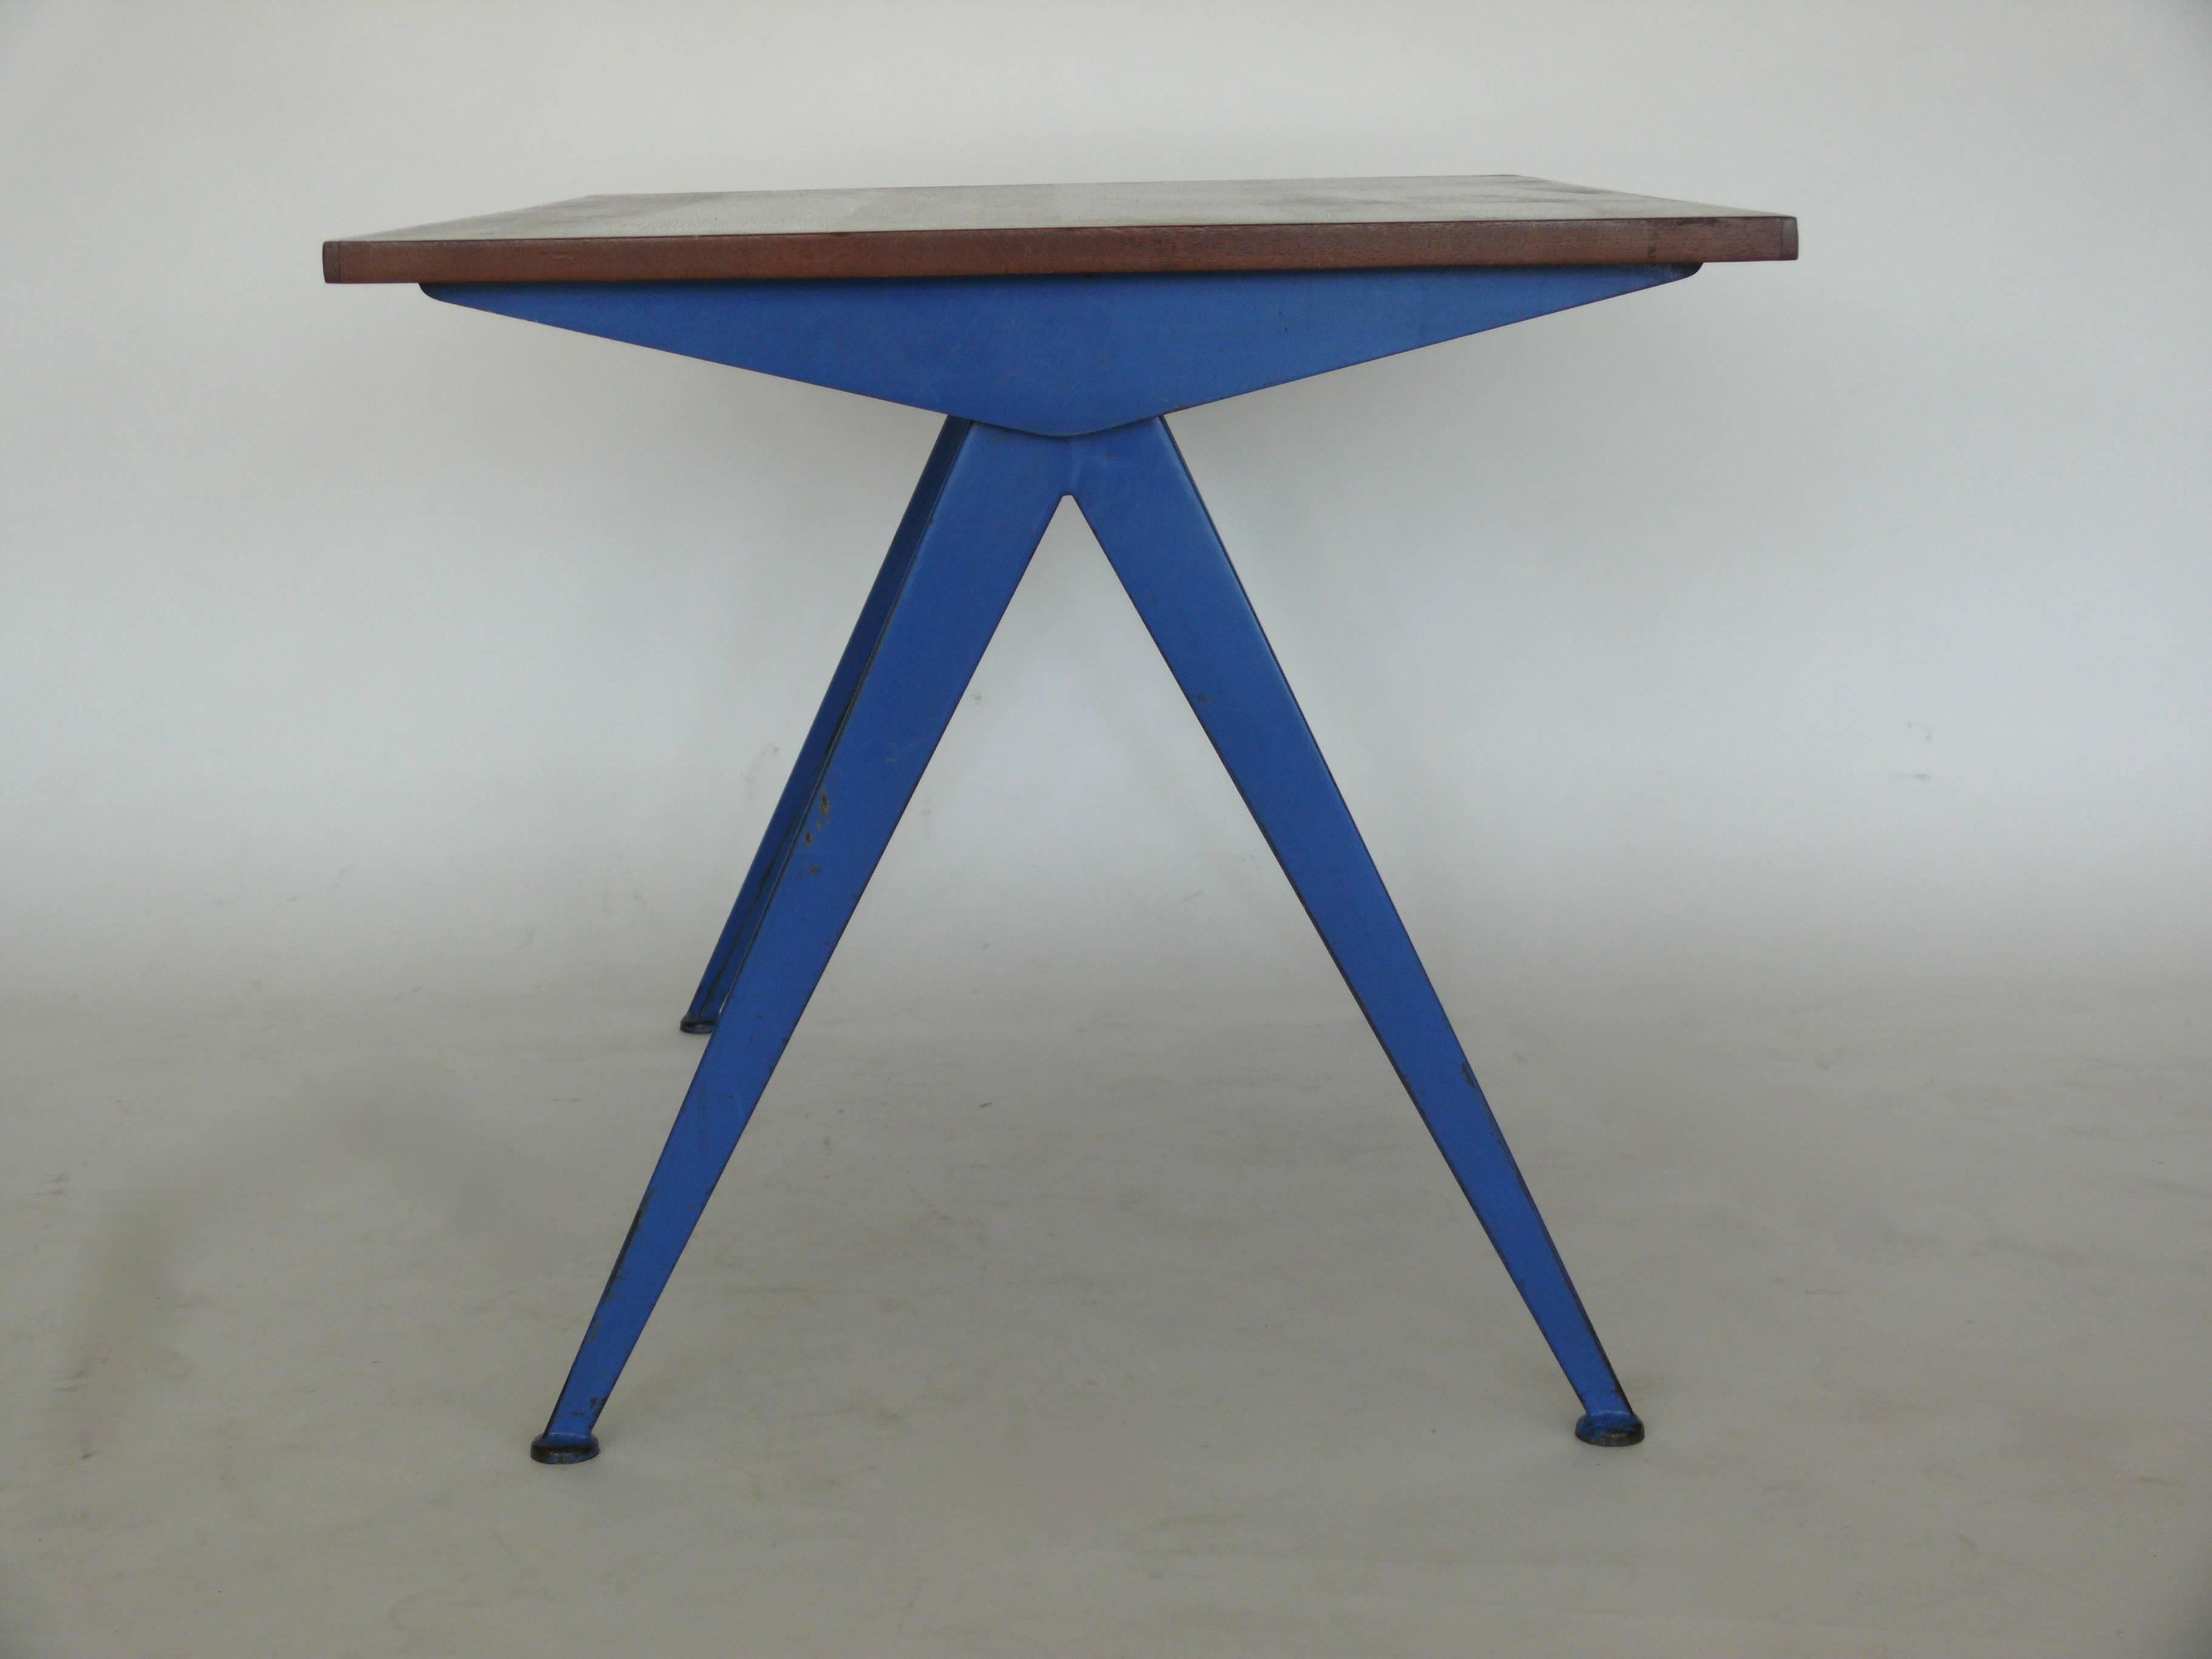 Stunning example of the iconic Compas desk, manufactured by Ateliers Jean Prouve, circa 1953. Oak top with rare blue enameled steel legs.